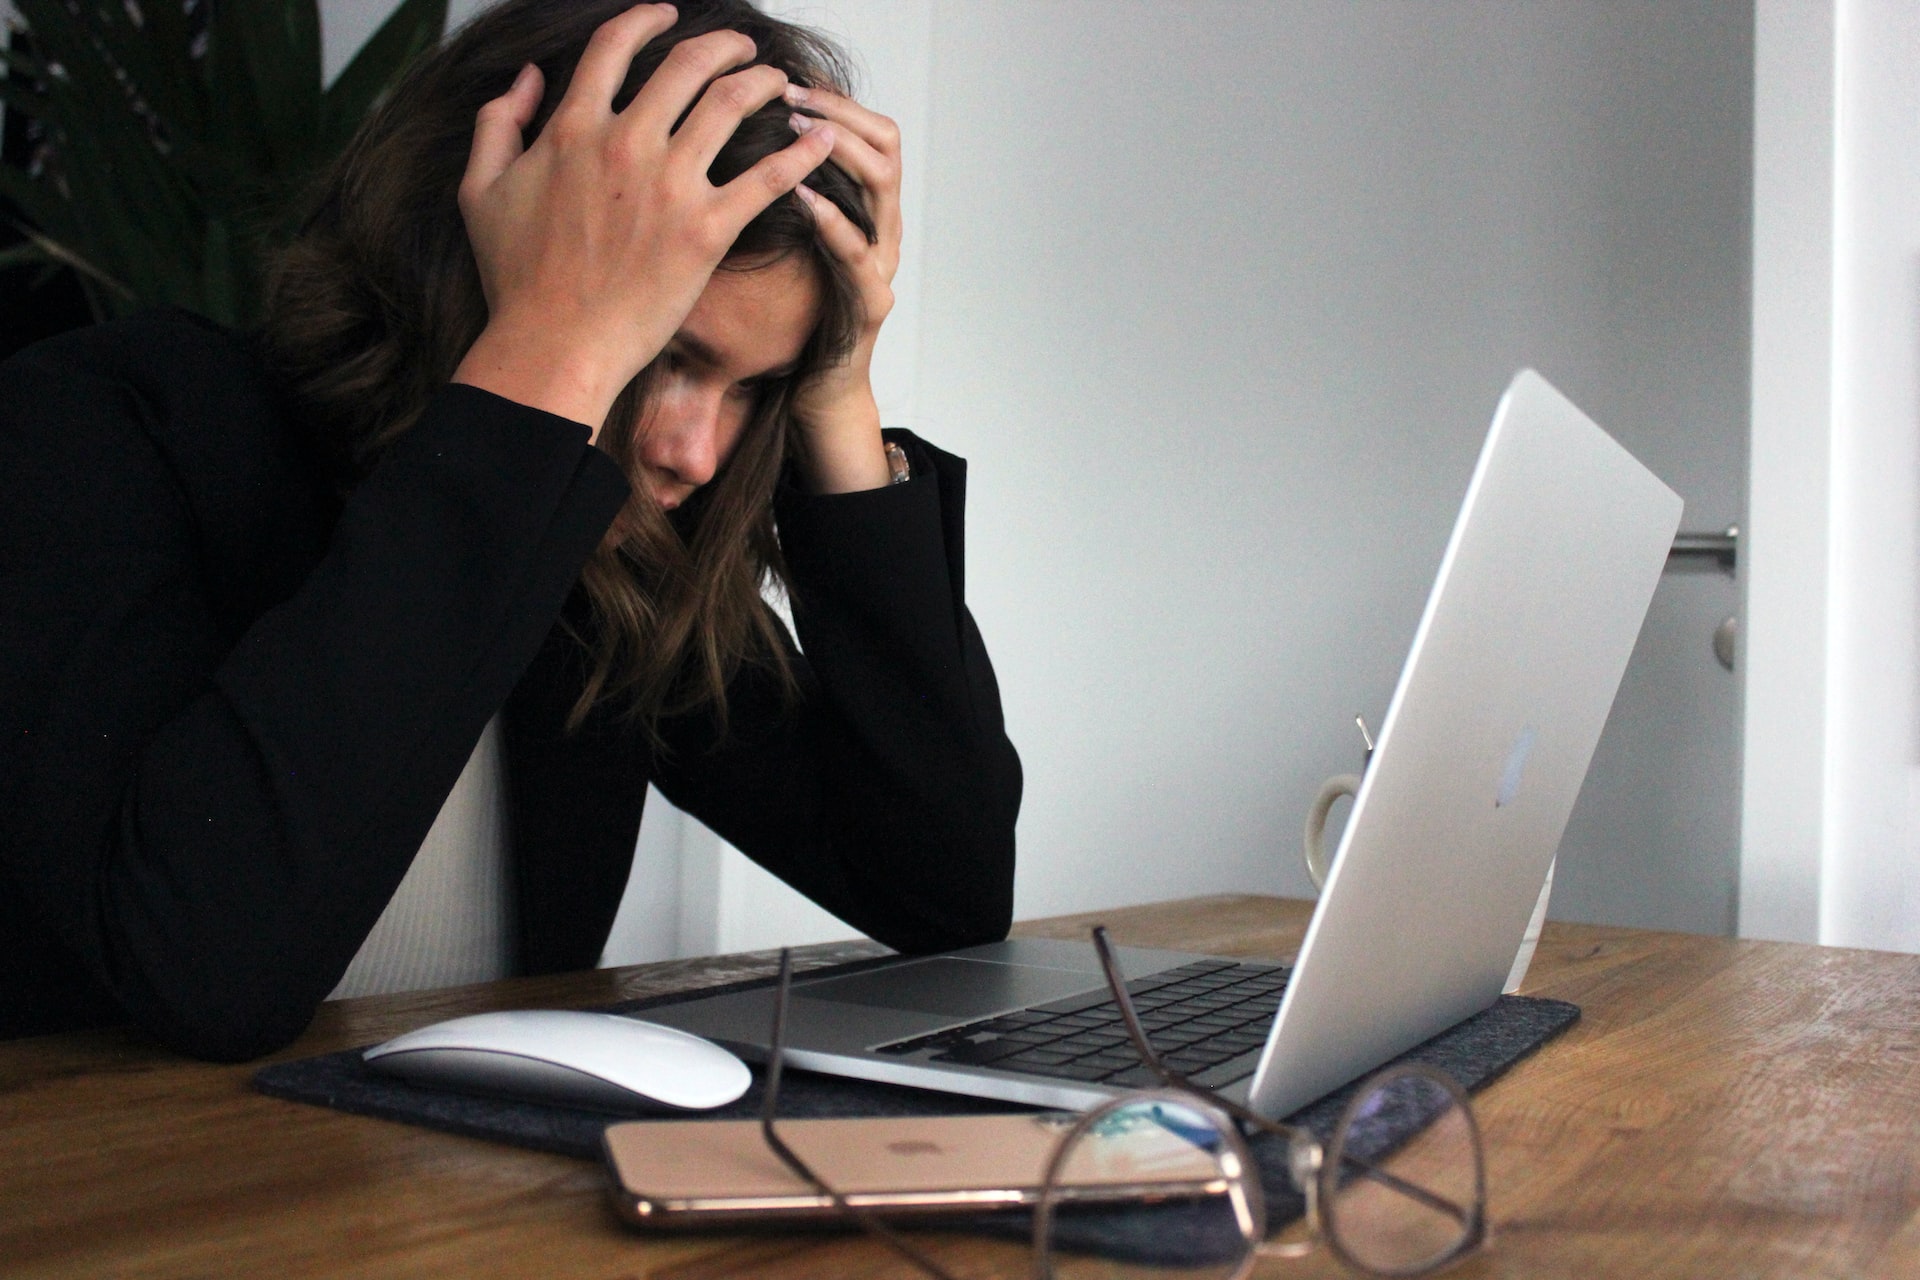 A woman sitting in front of a laptop with her head in her hands in a frustrated posture.